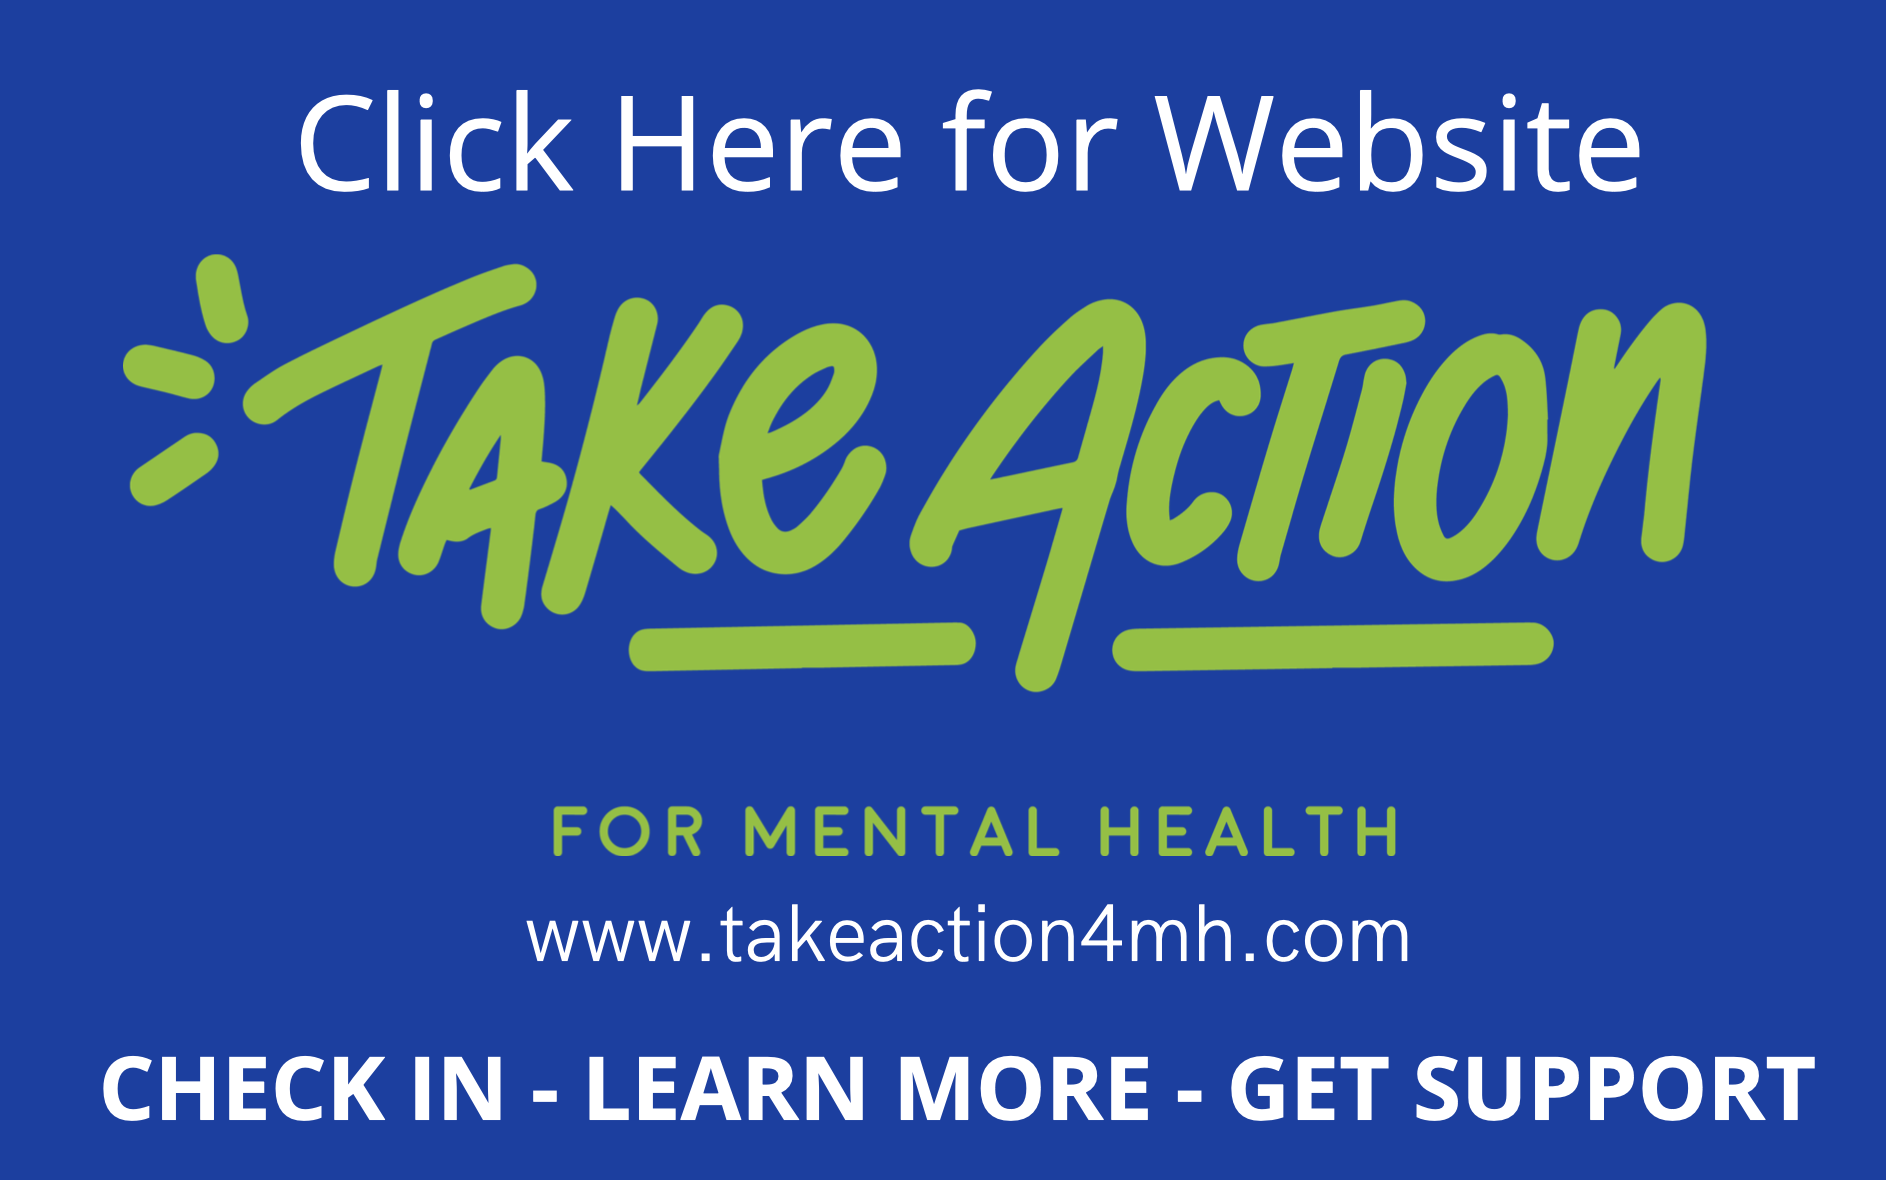 Take Action for Mental Health